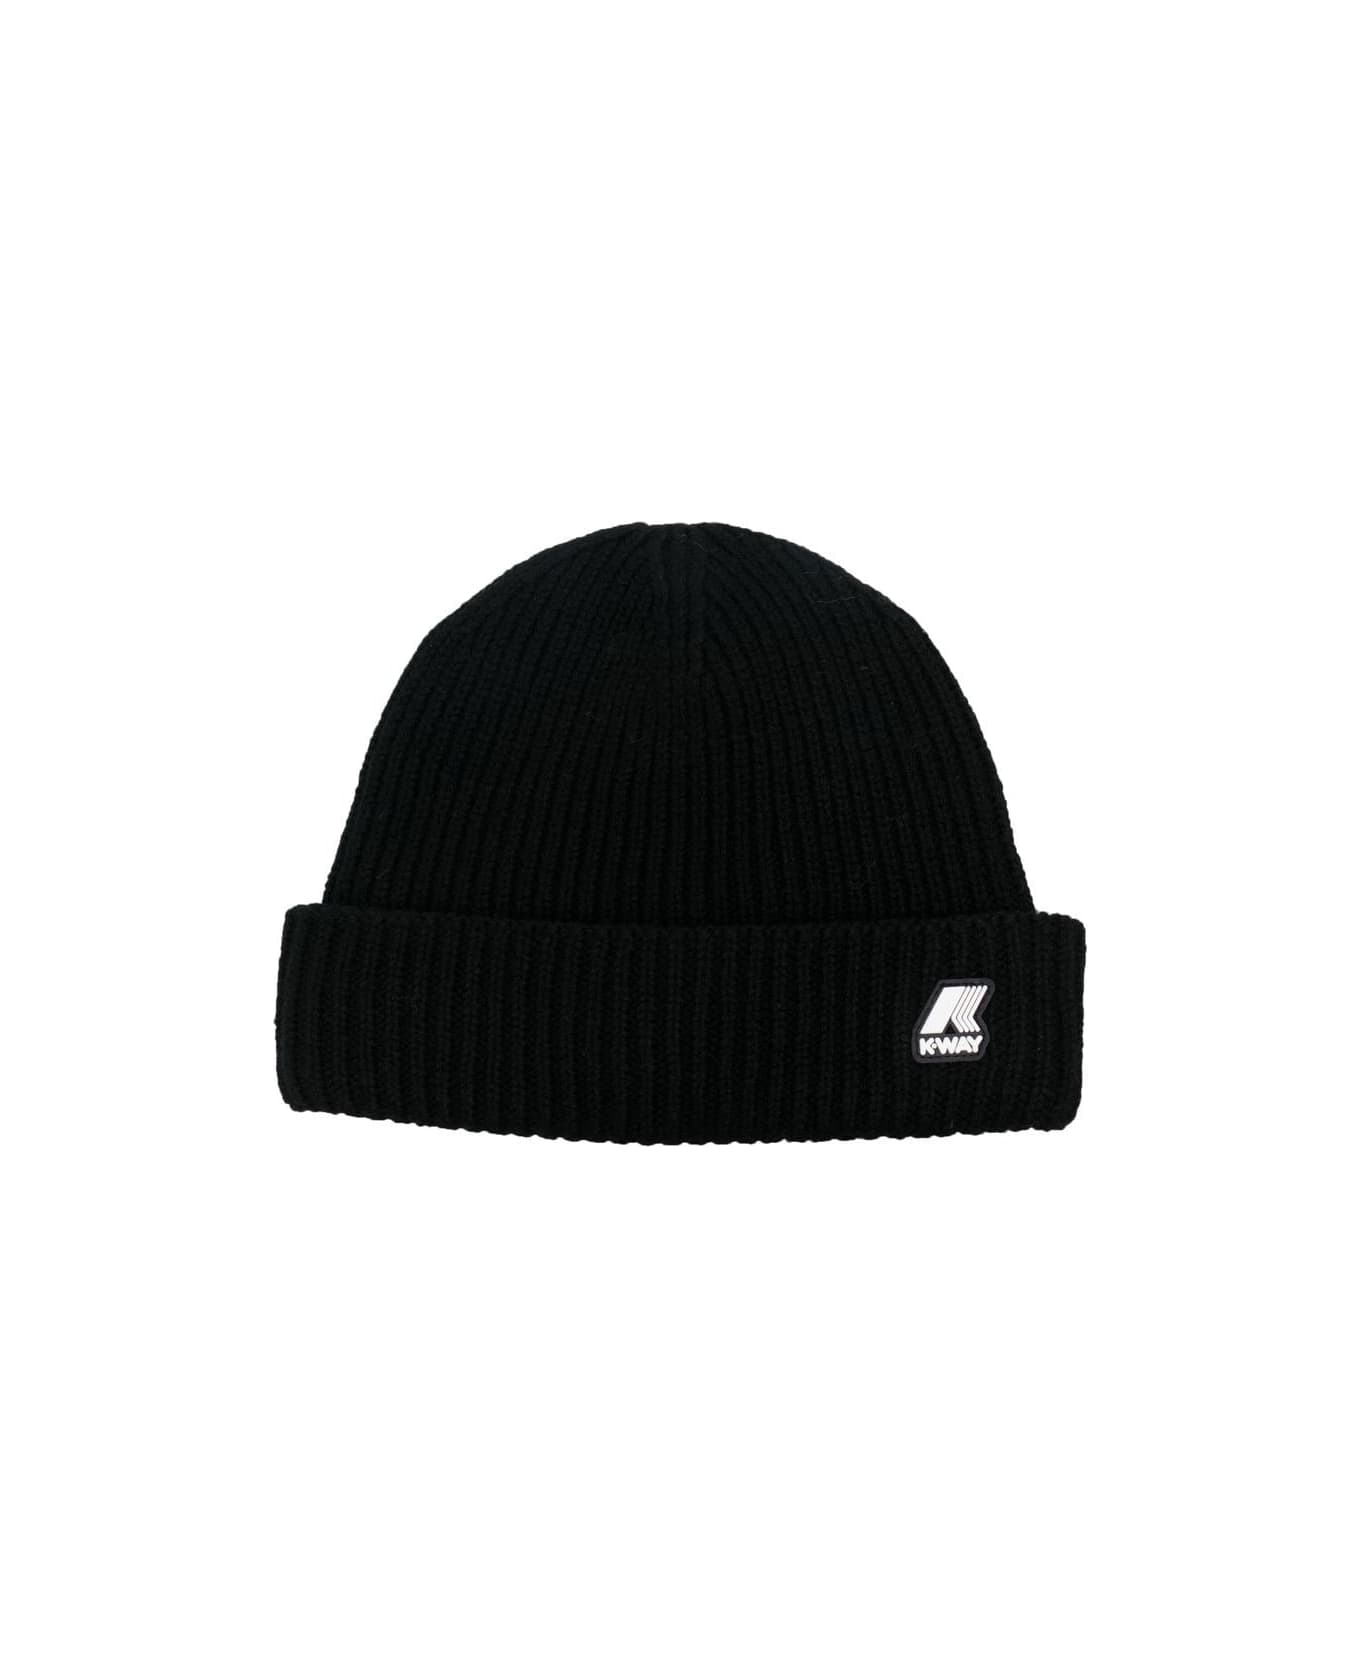 K-Way Ribbed Hat With Patch - Black アクセサリー＆ギフト